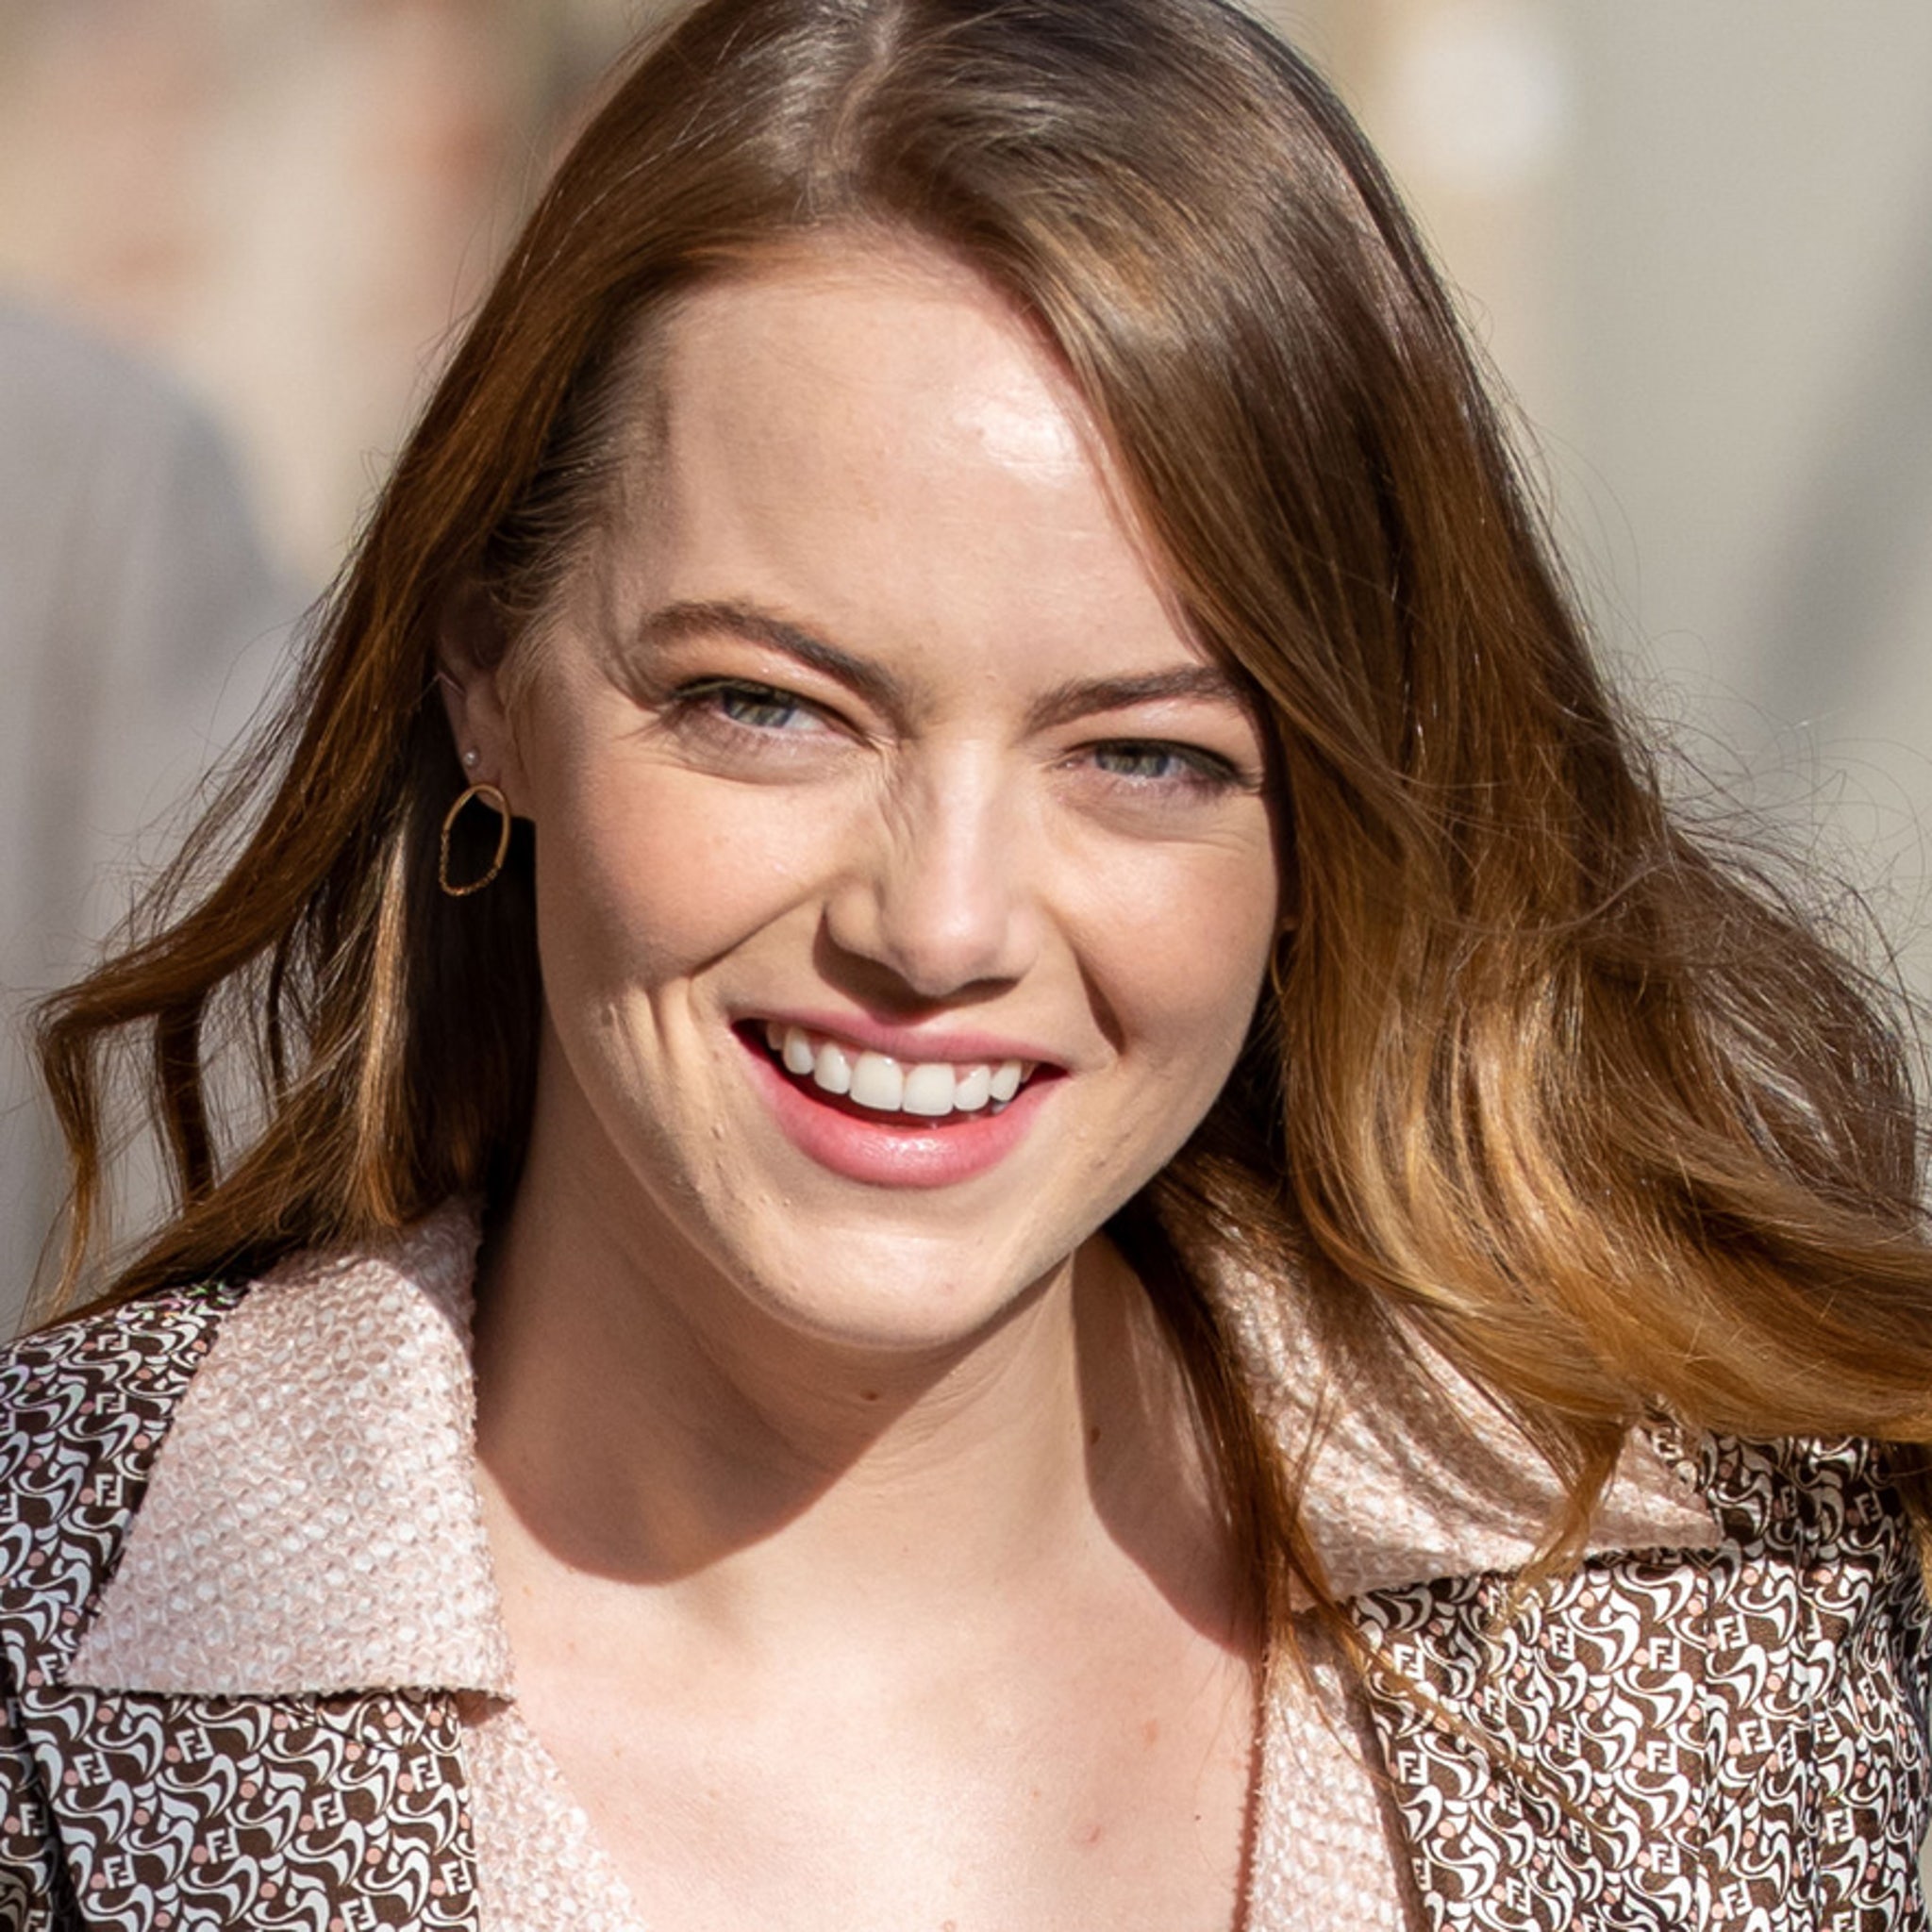 Emma Stone and SNL's Dave McCary welcome their first child